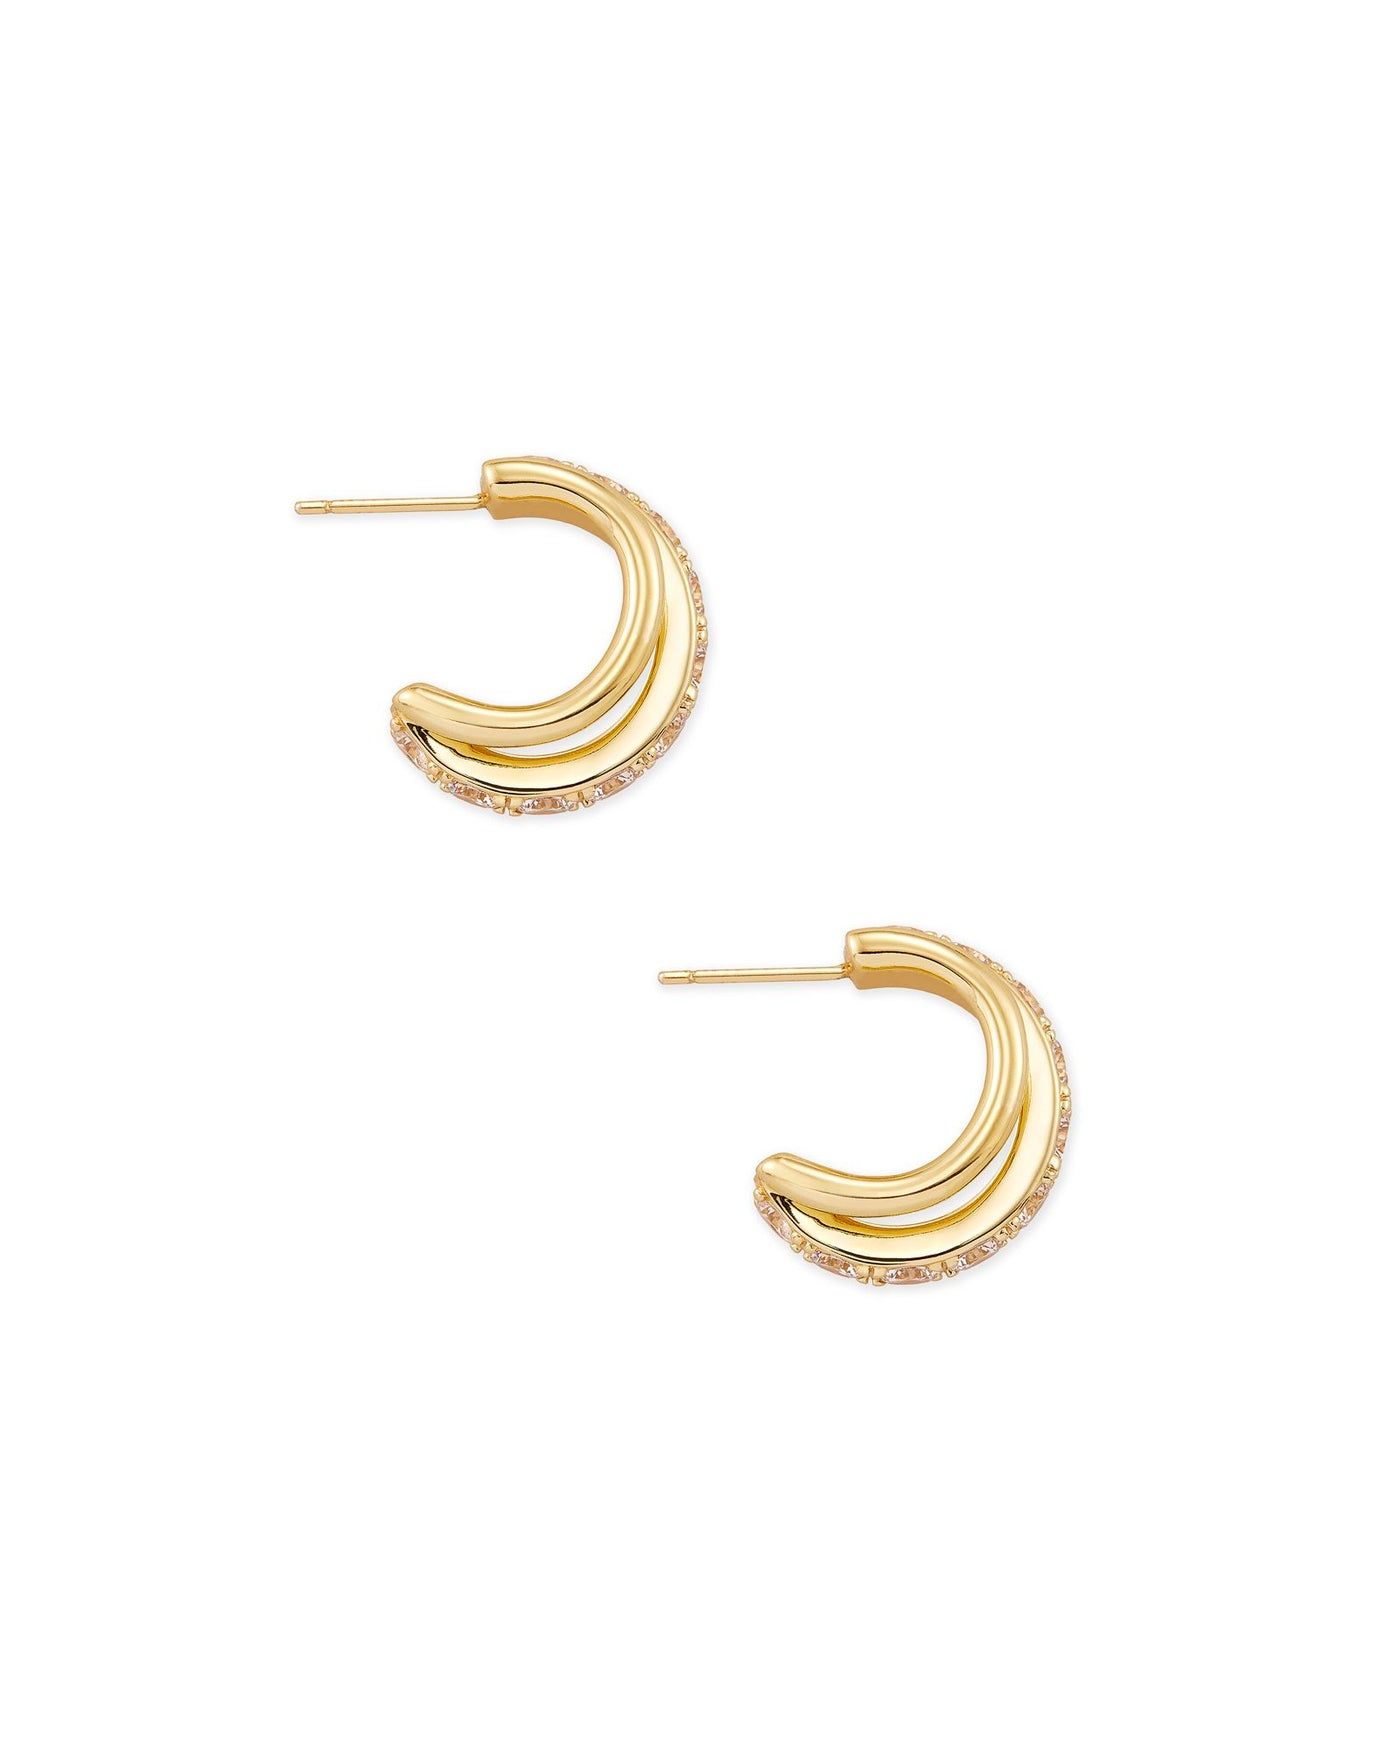 Kendra Scott Livy Huggie Earrings-Earrings-Kendra Scott-Market Street Nest, Fashionable Clothing, Shoes and Home Décor Located in Mabank, TX